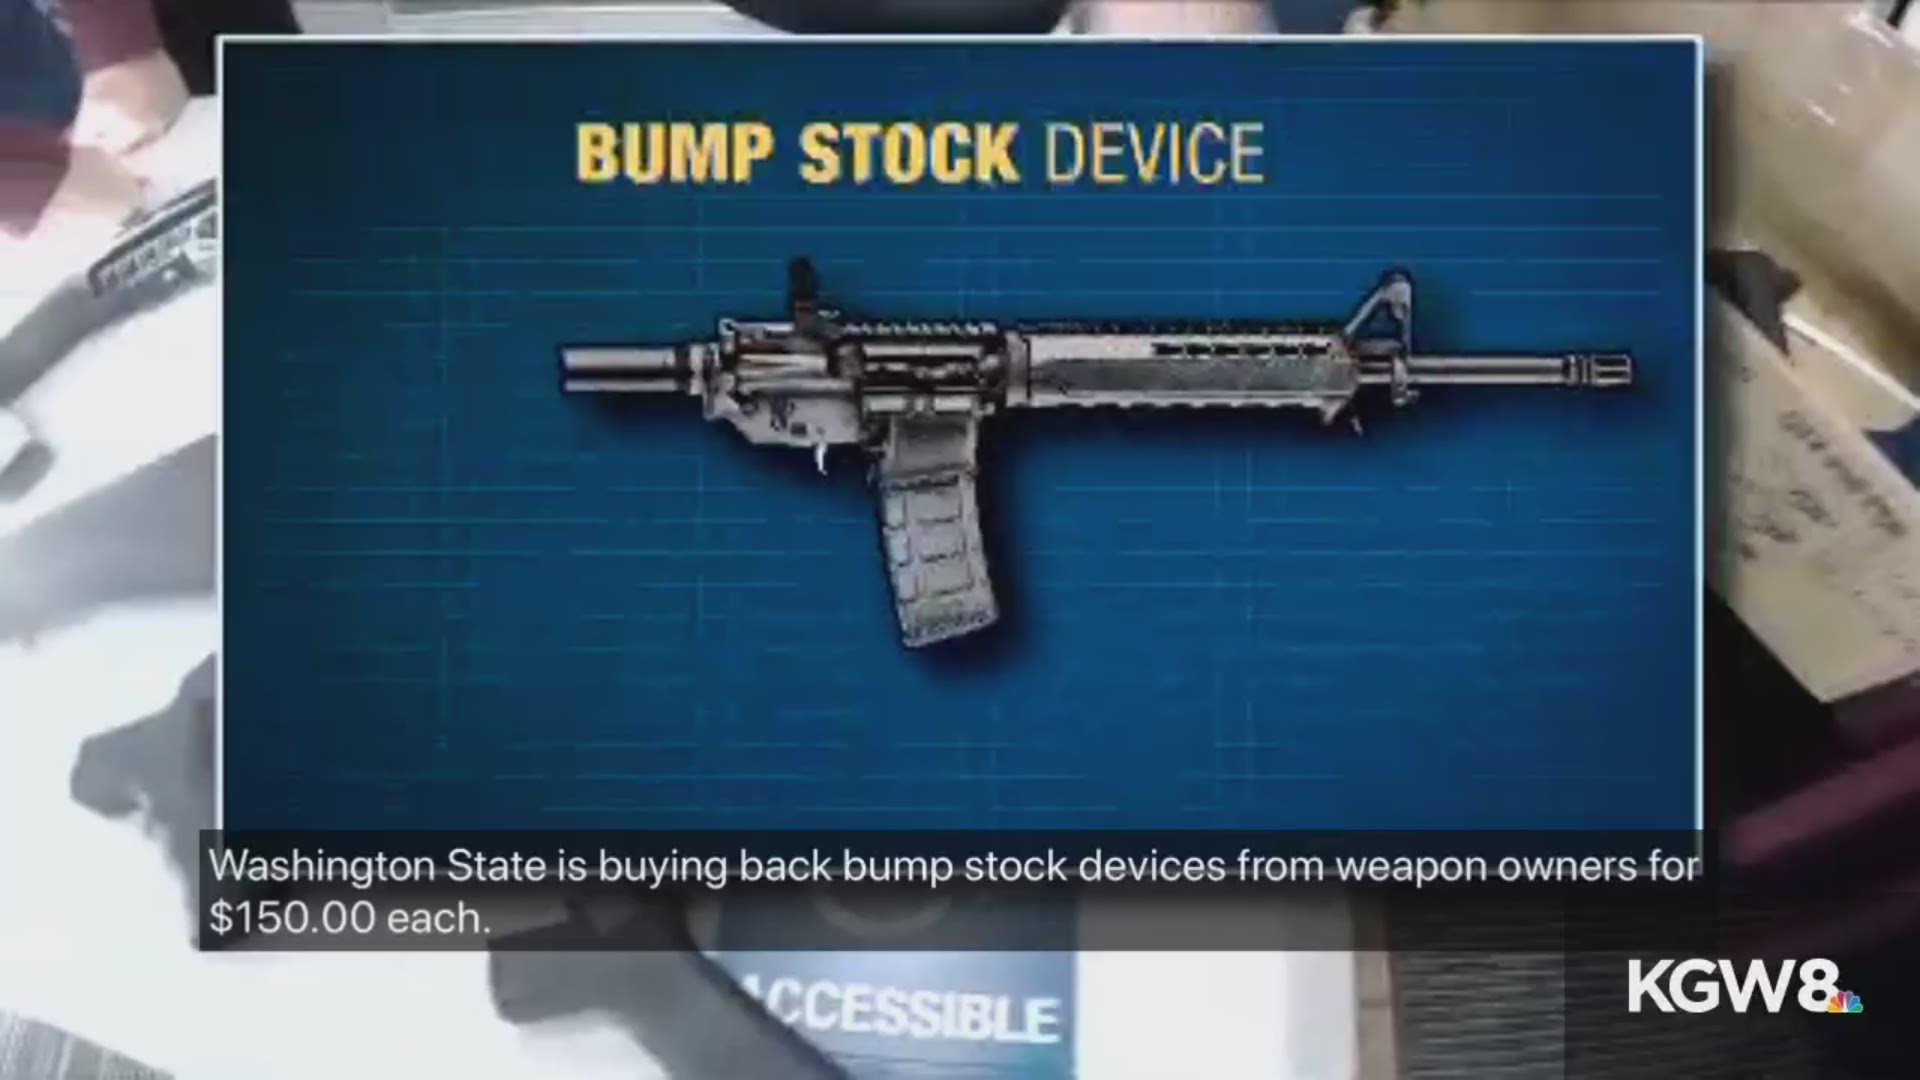 Washington is buying back bump stocks before they become illegal.